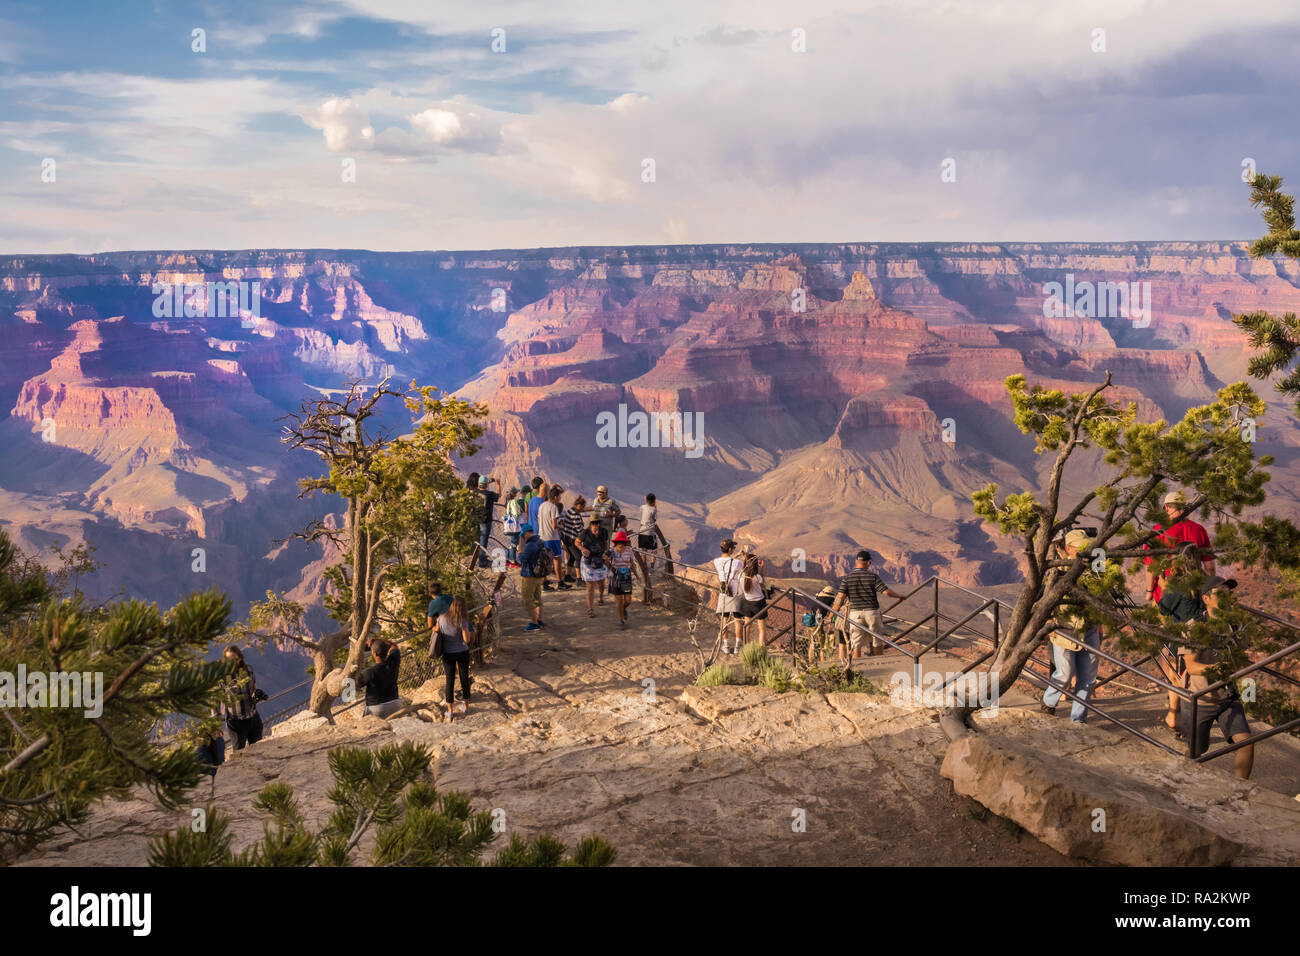 Large number of people enjoying beautiful view or rock formations of the Grand Canyon Stock Photo